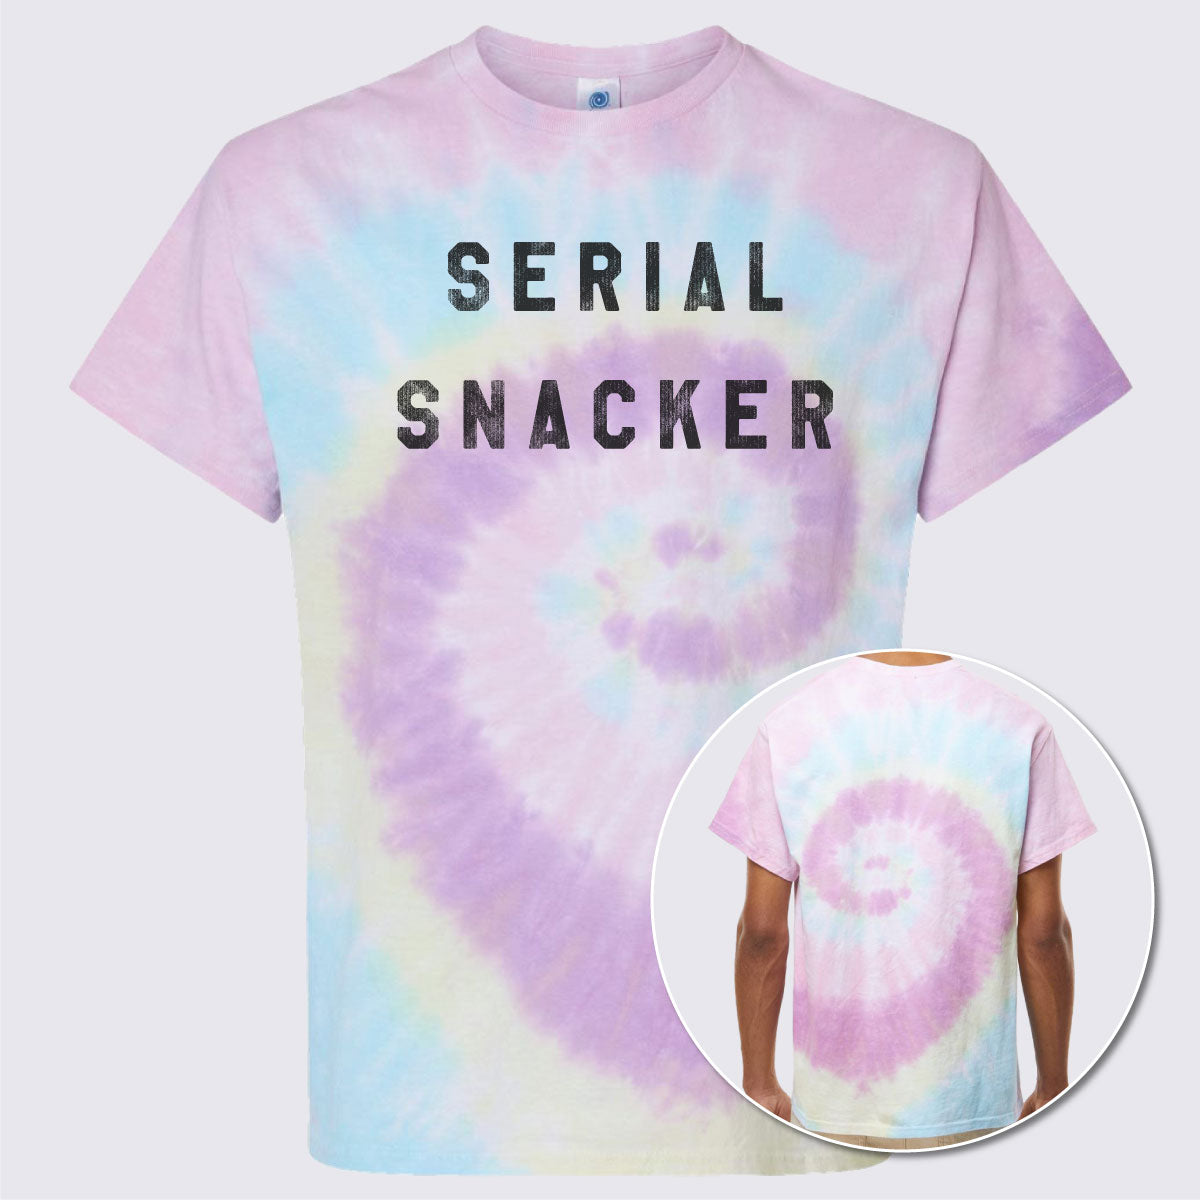 Serial Snacker Multi-Color Tie-Dyed T-Shirt - The LFT Clothing Company